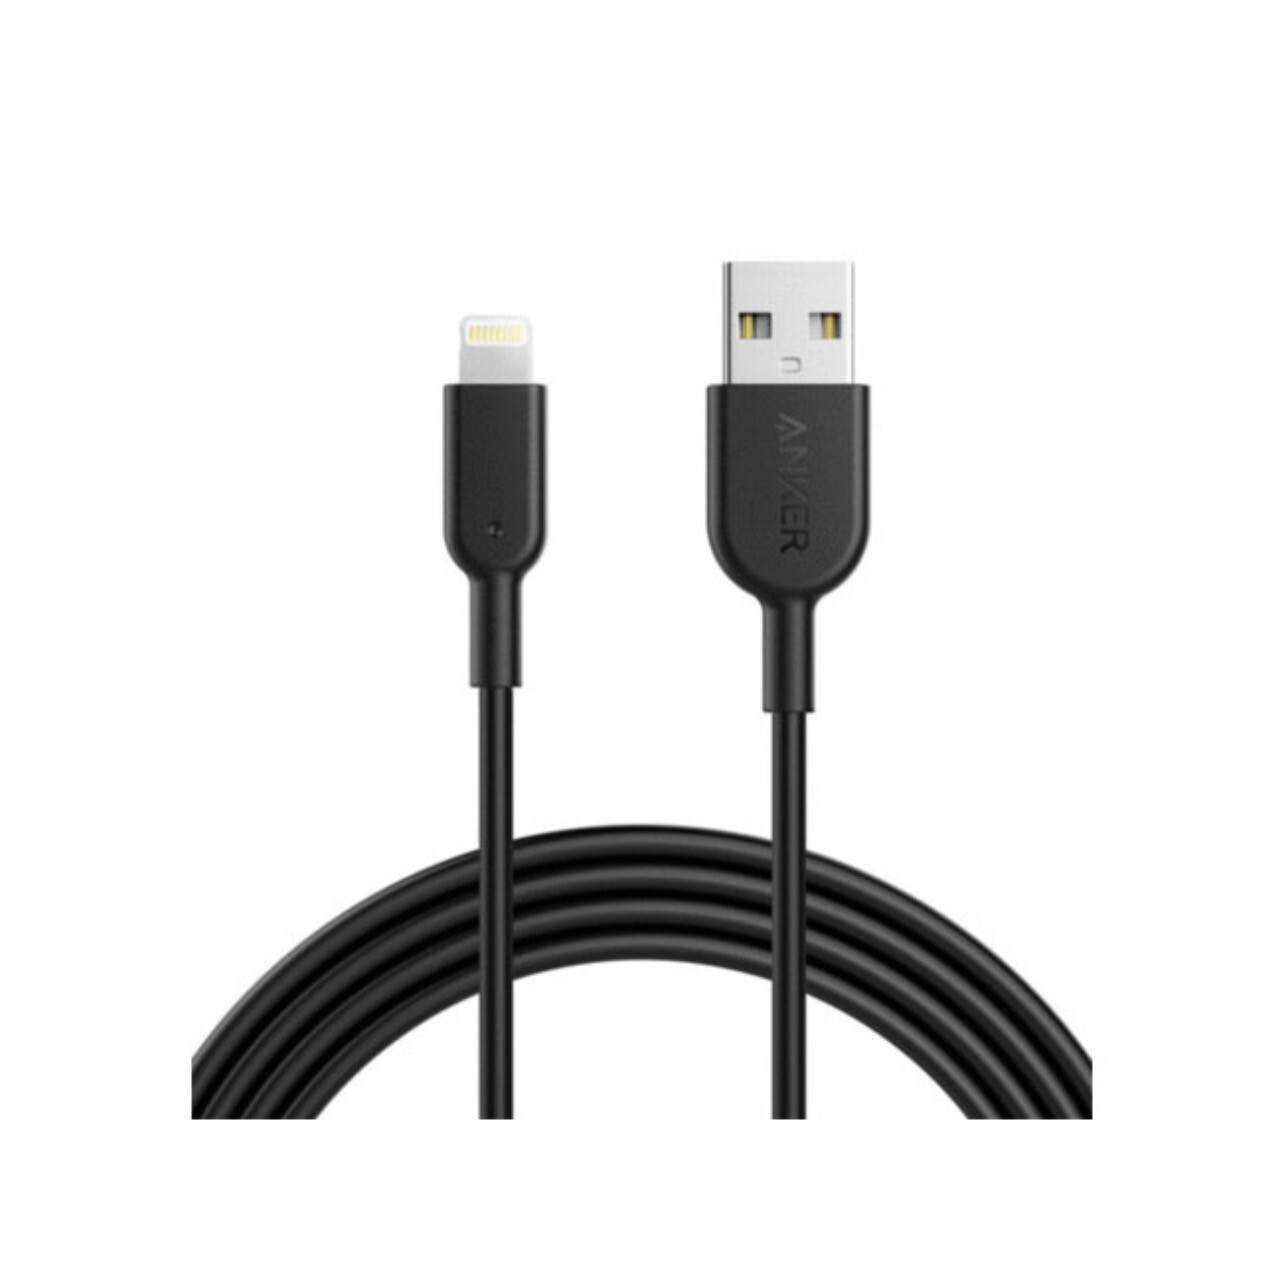 Anker Apple iPhone USB charging cable 2 meter long